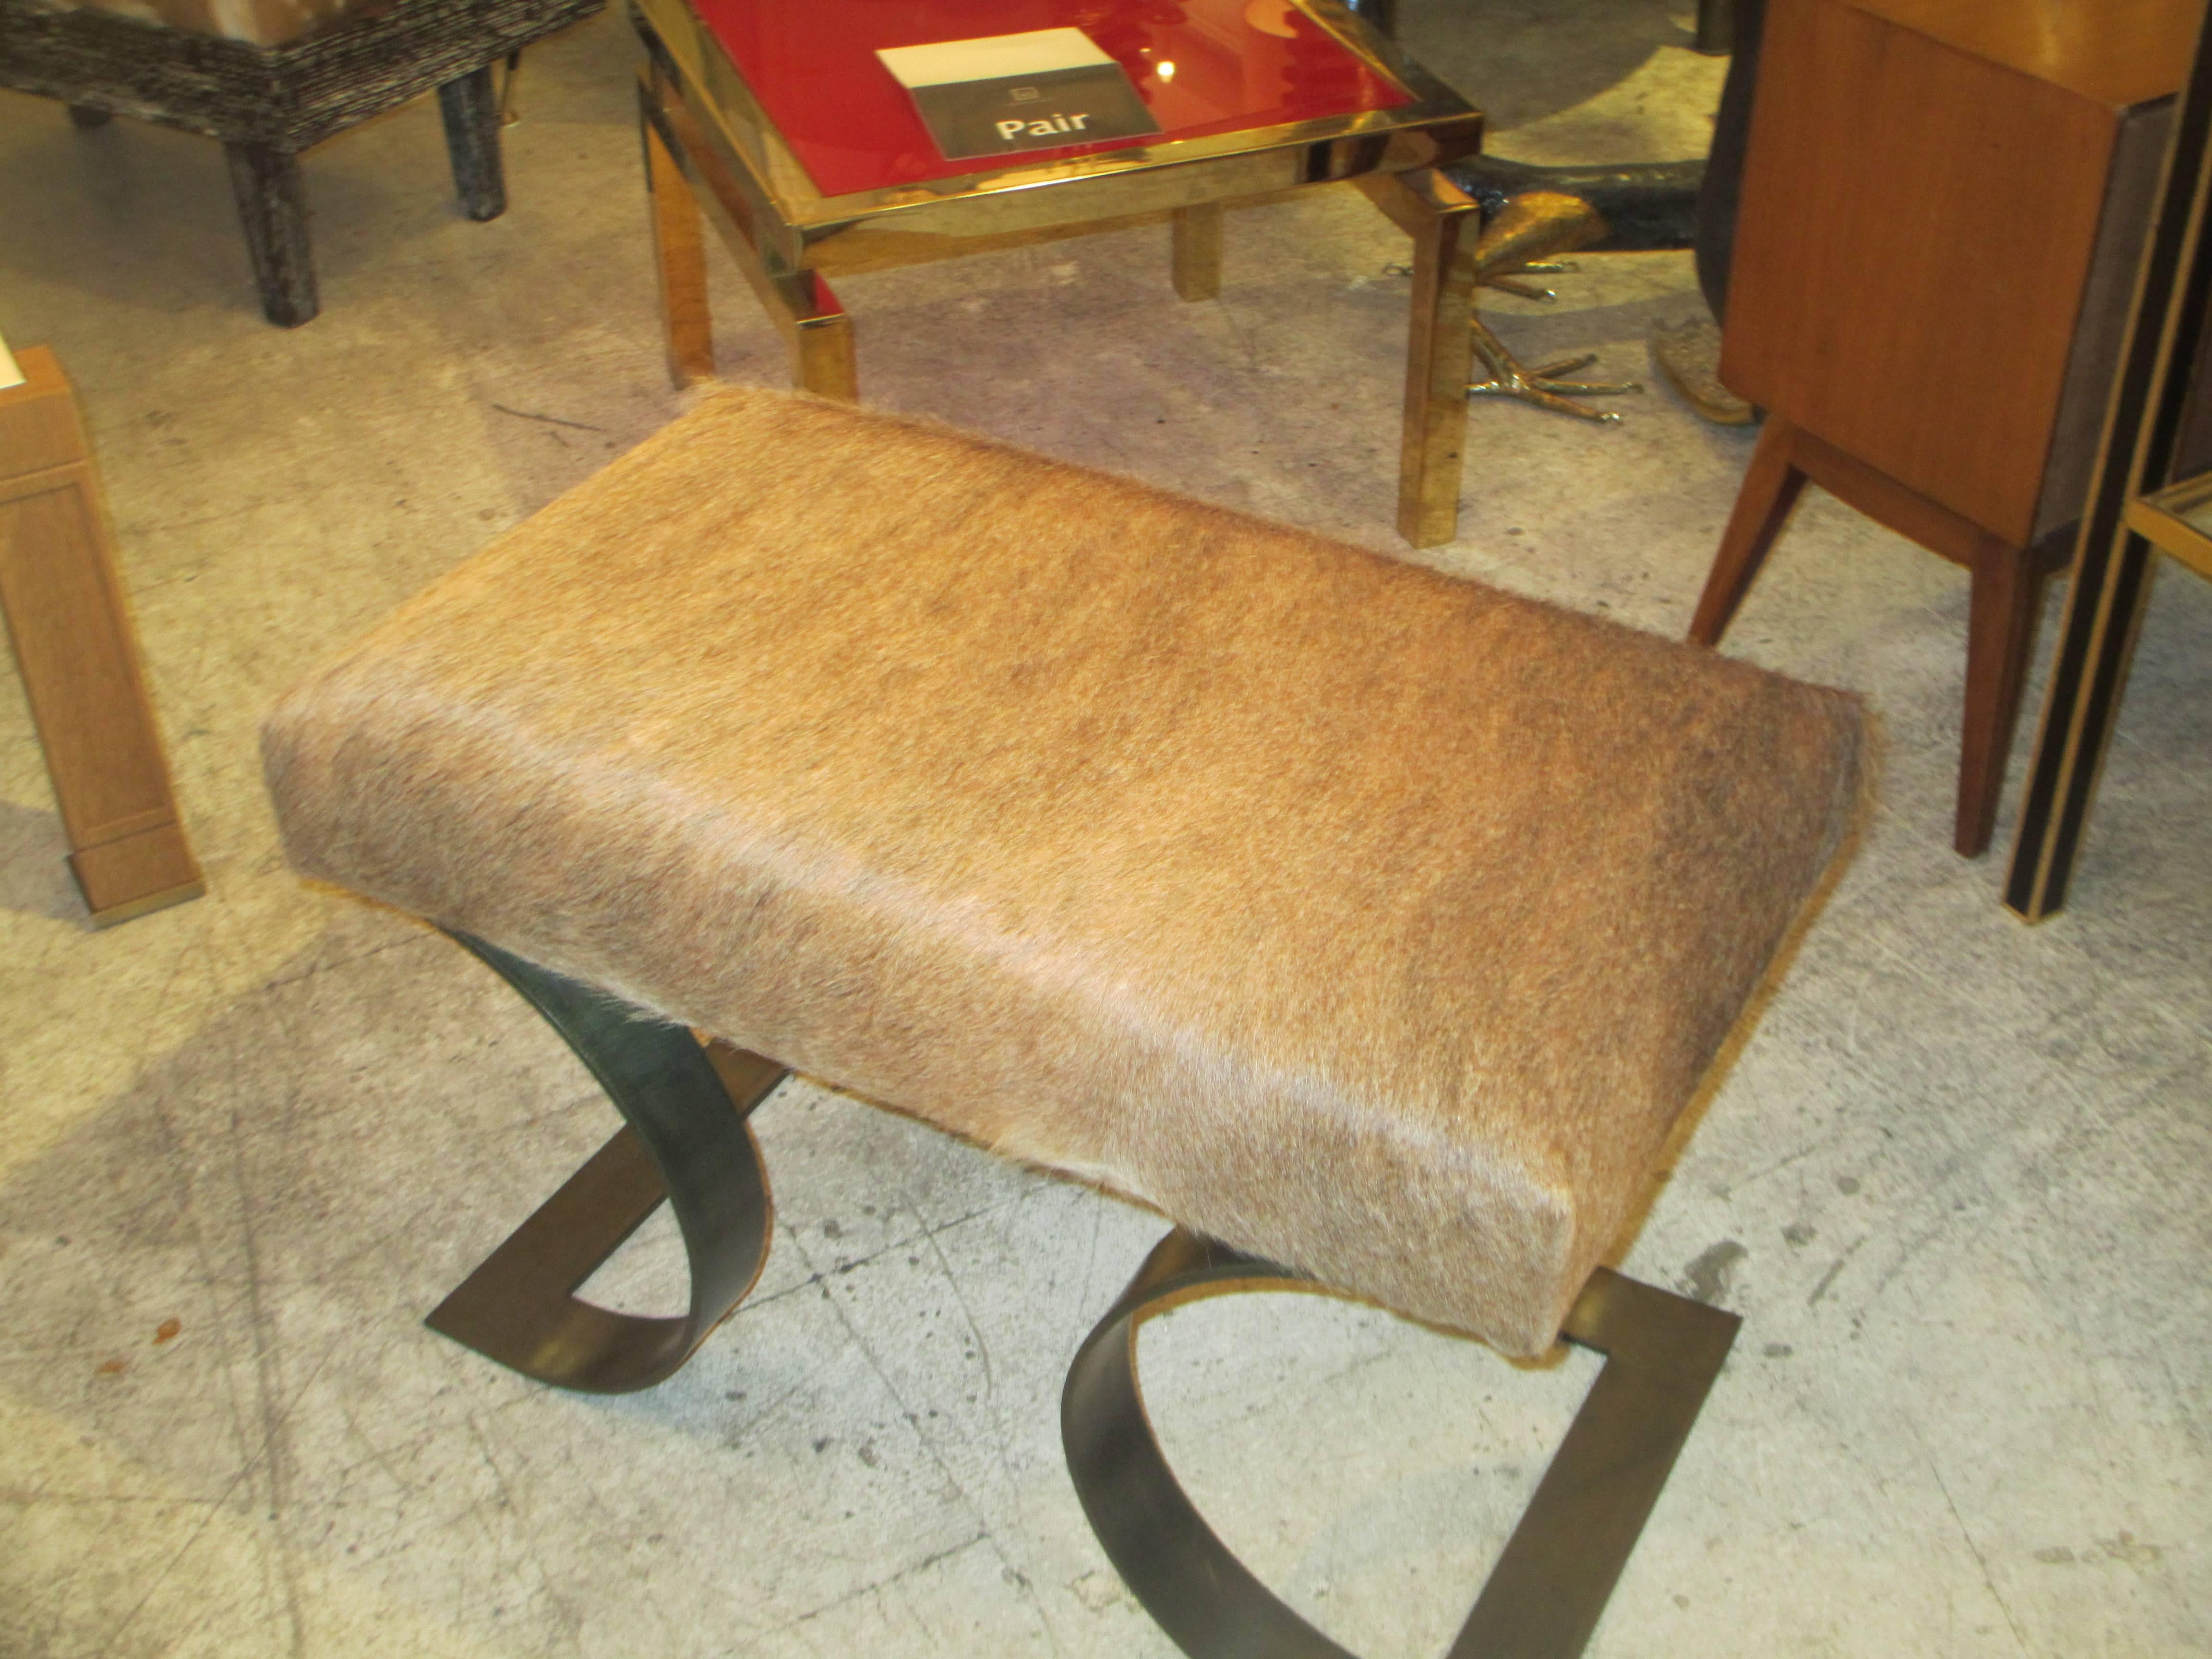 French Pair of Sculptural Mid-Century Modern Benches, Upholstered in Cattle Hide